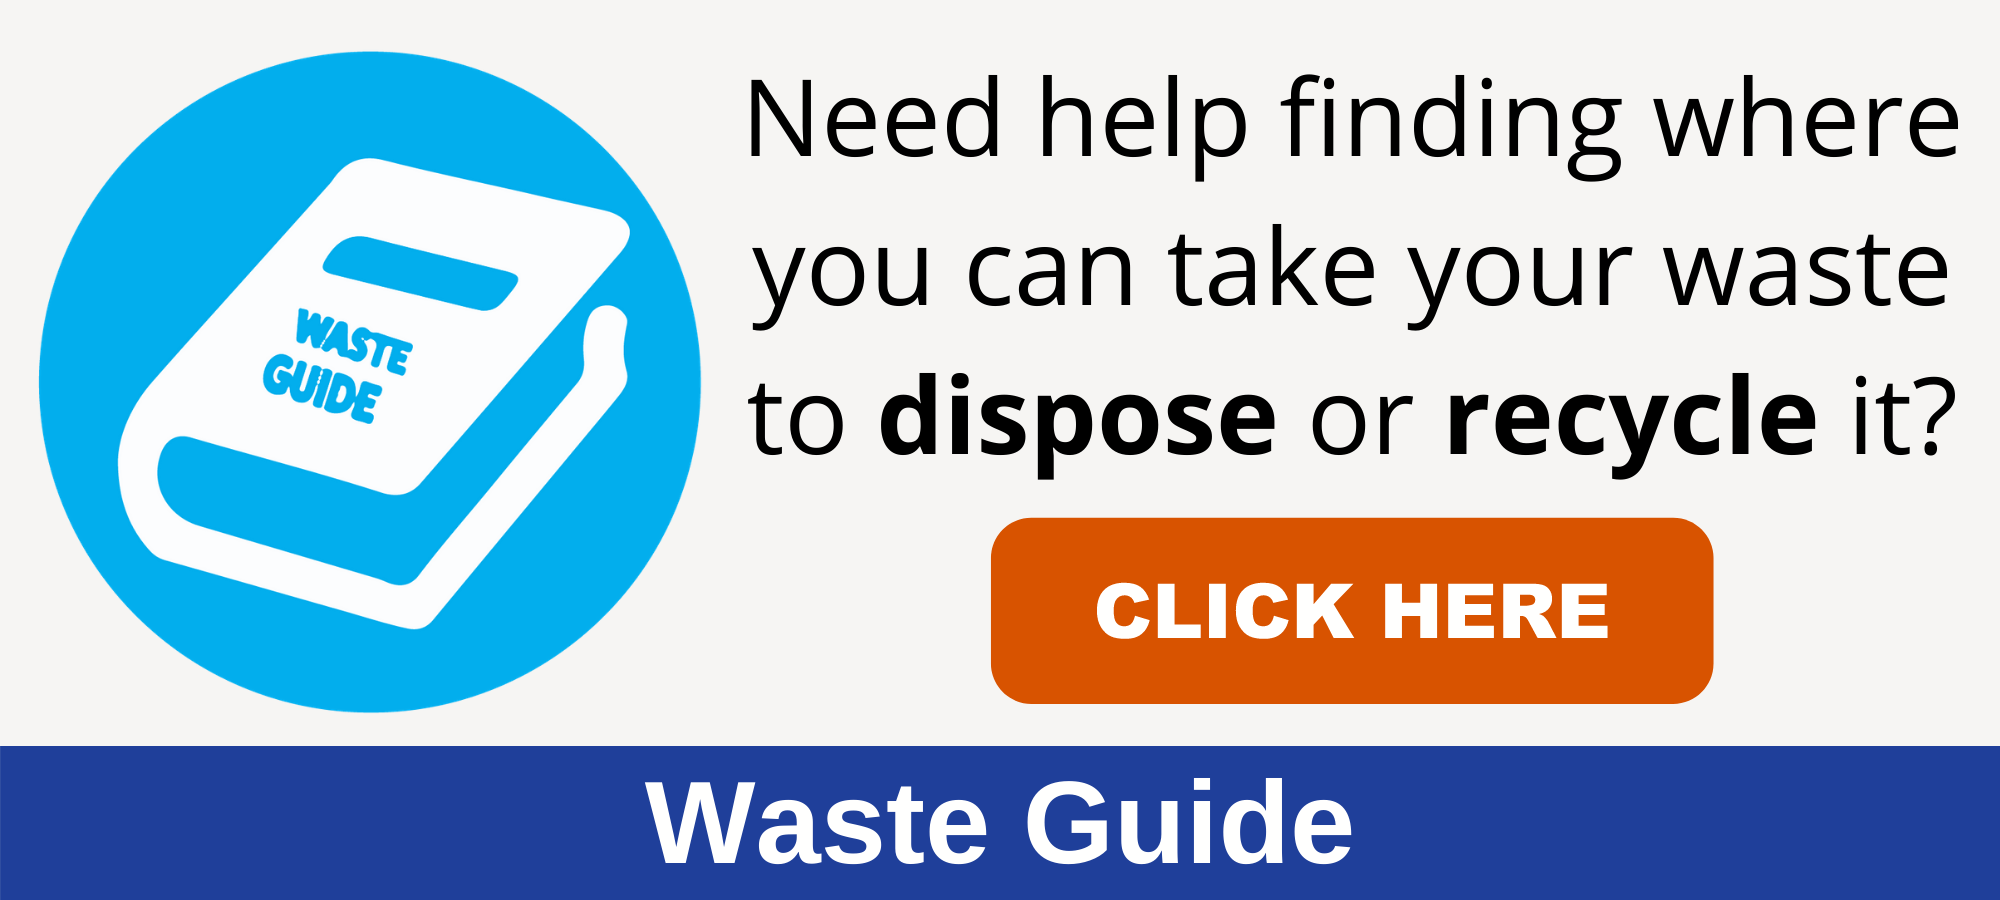 Waste Guide